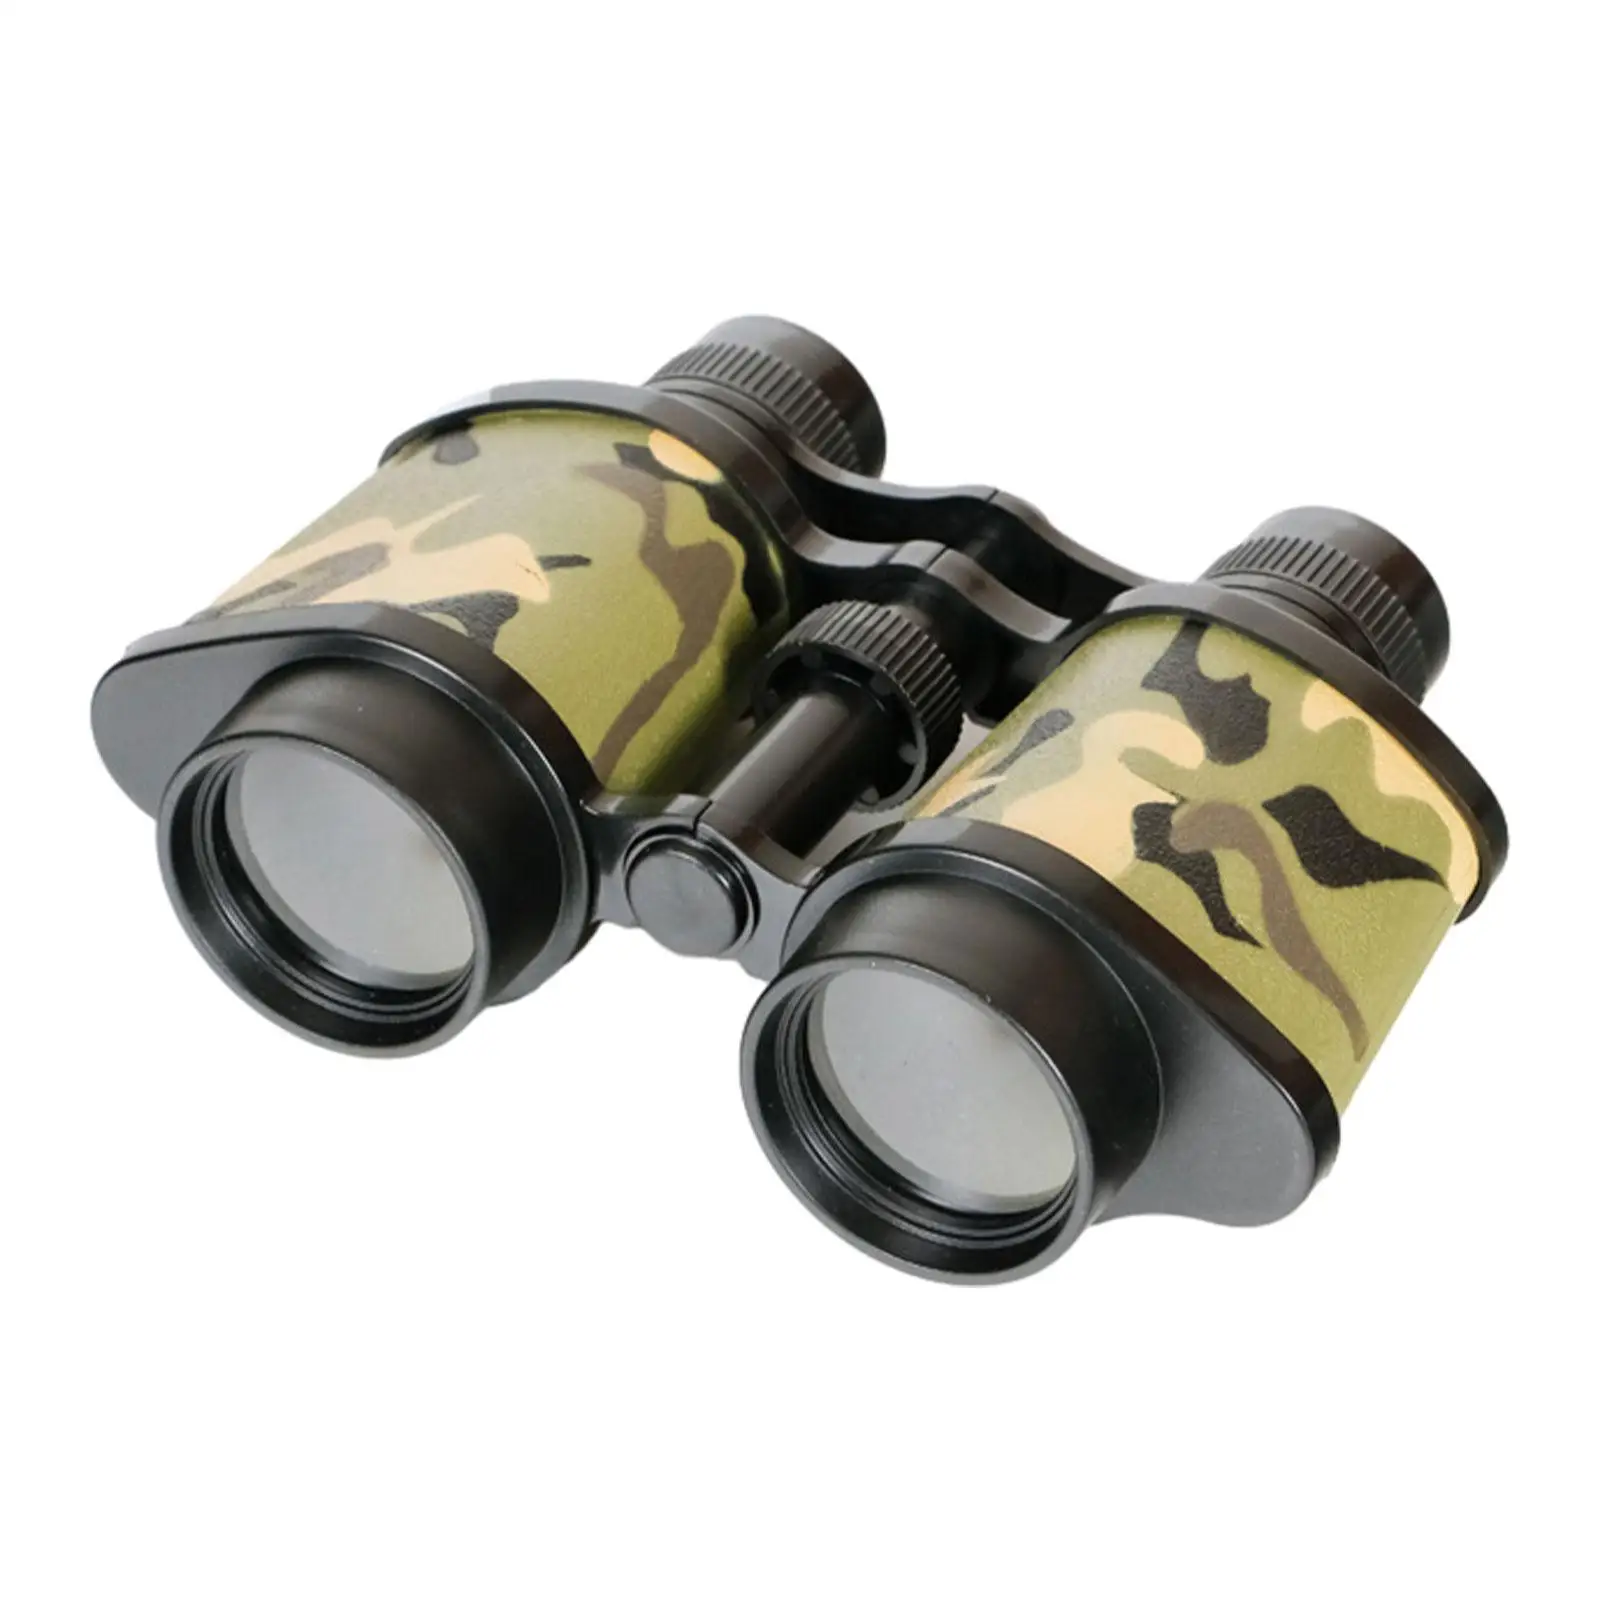 Kids Binoculars Toy 8x30 Shockproof with Neck Lanyard Jungle Binoculars Toy for Sciences Detective Presents Party Camping Favors